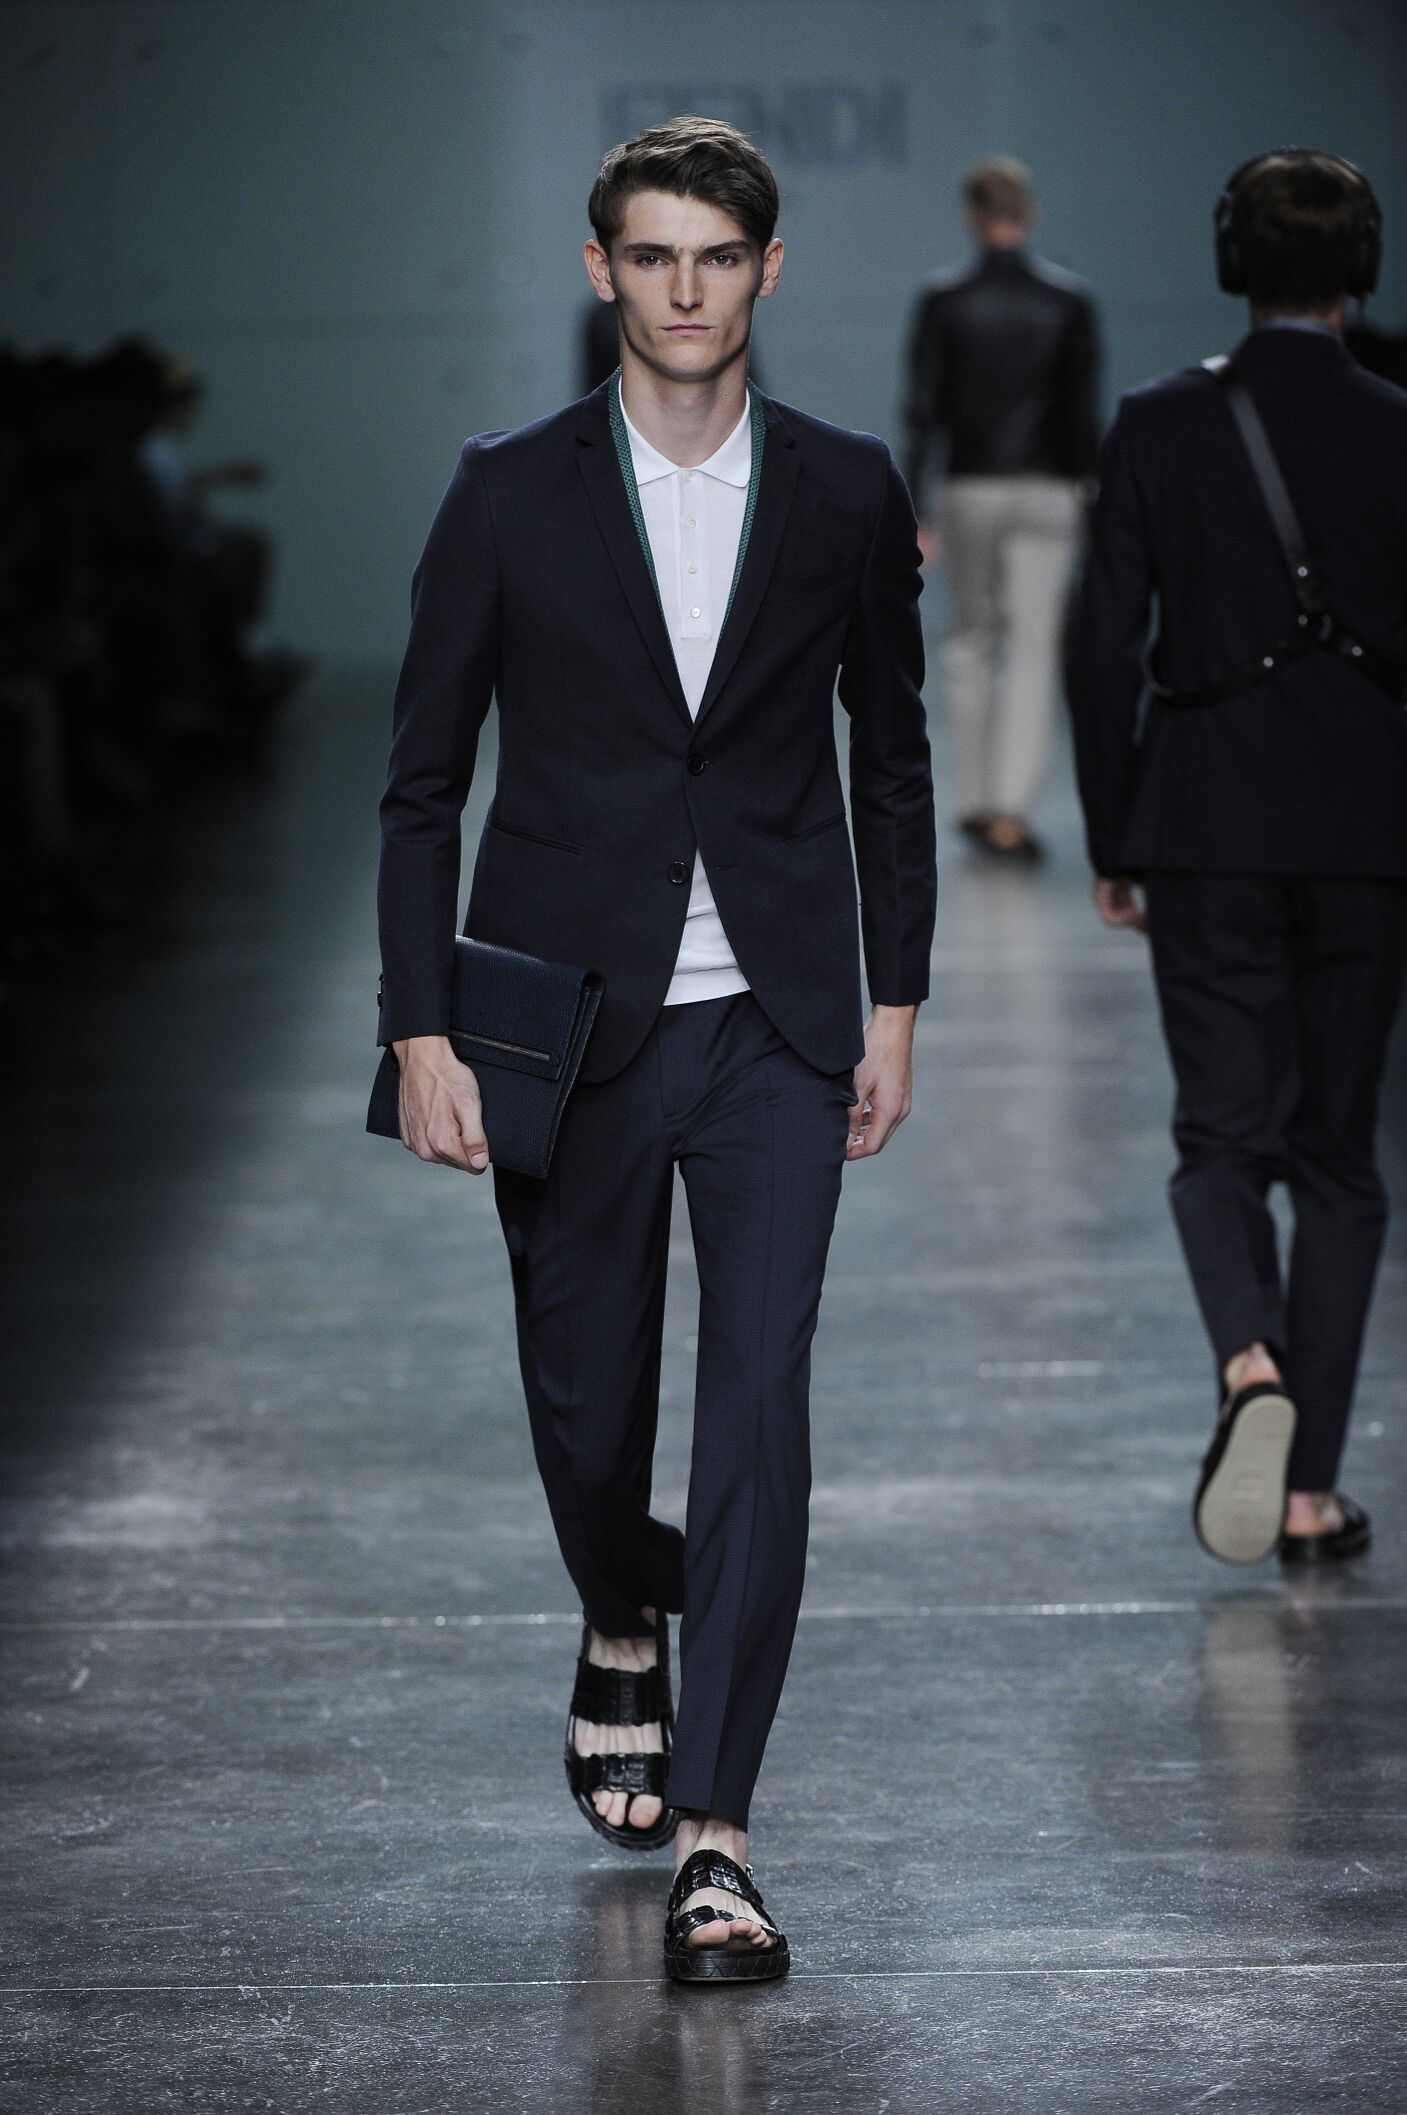 FENDI SPRING SUMMER 2015 MEN'S COLLECTION | The Skinny Beep